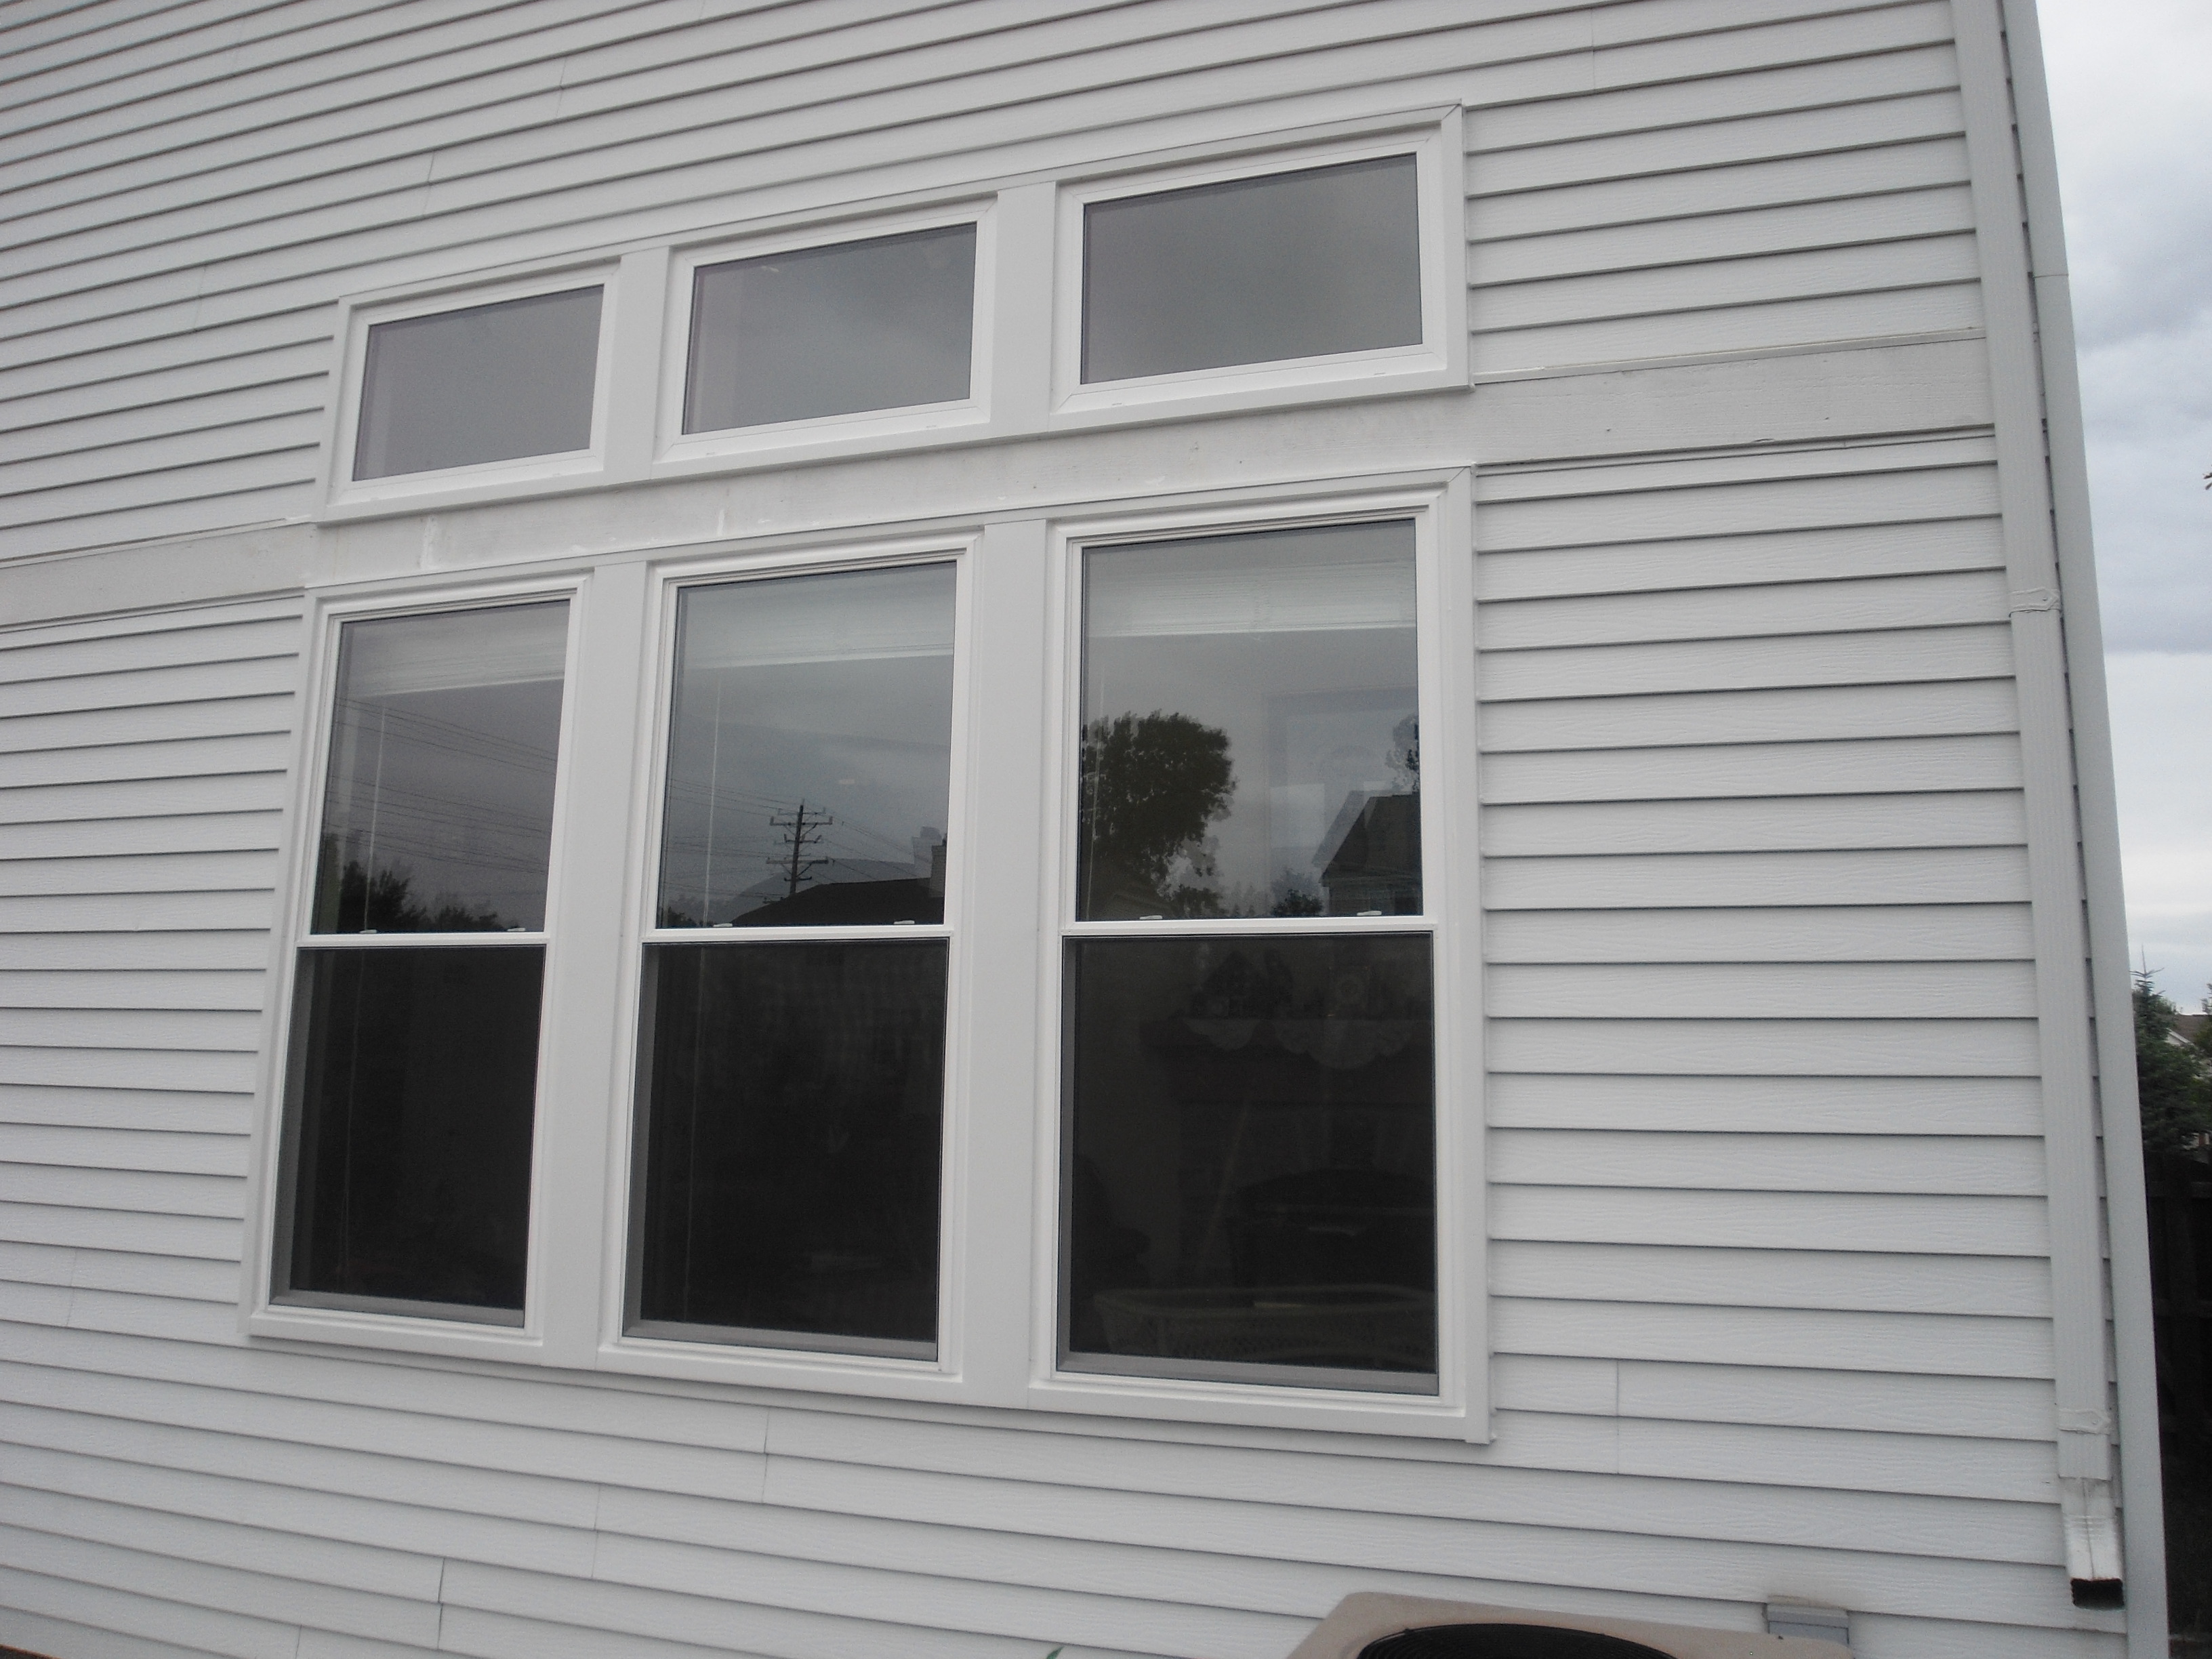 We install frames, insulate around the window and finish them on the exterior with maintenance free aluminum in any color. The end result is a warm, draft free window.